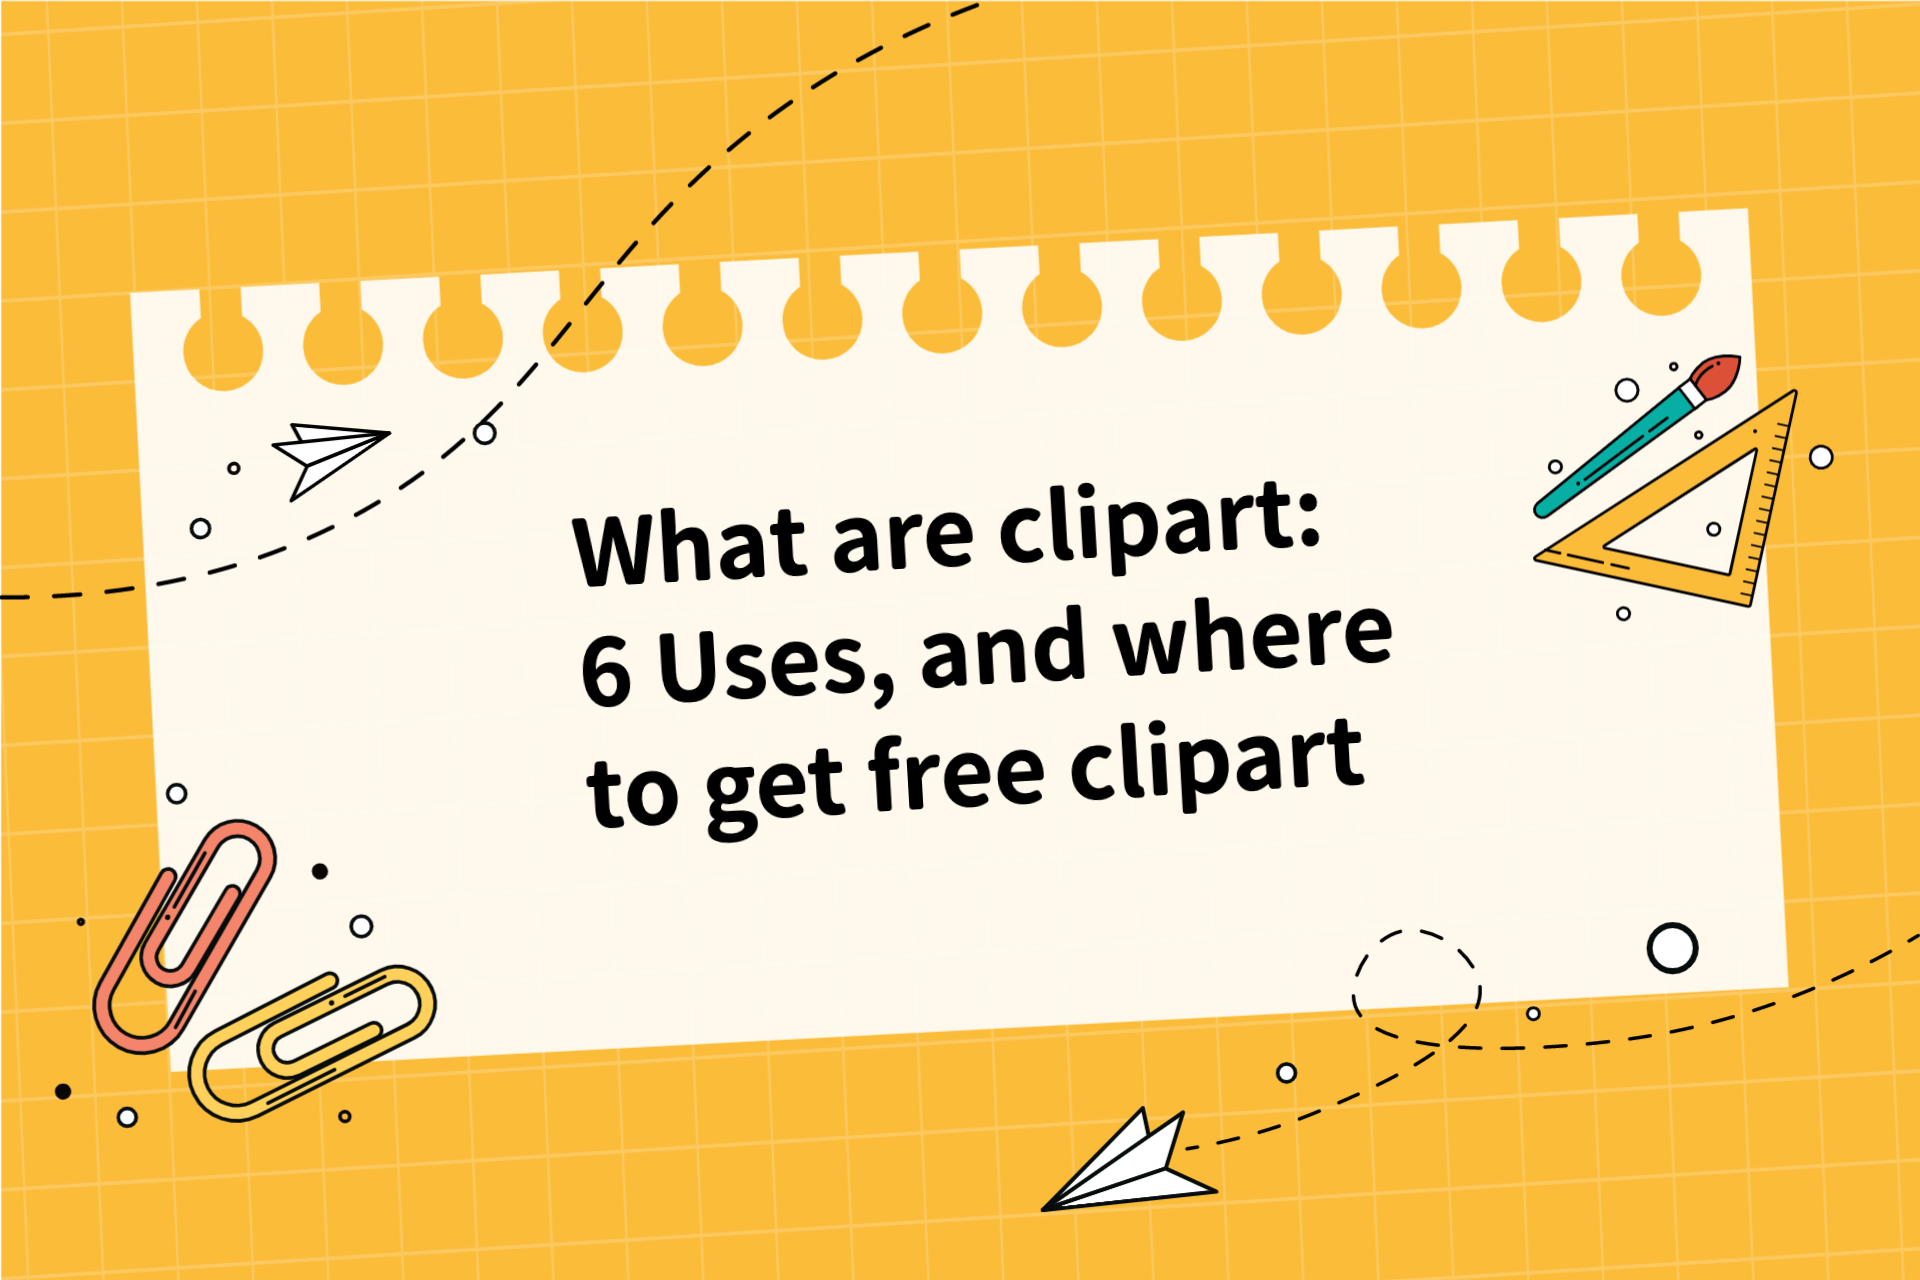 What is clipart: 6 Uses, and where to get free clipart